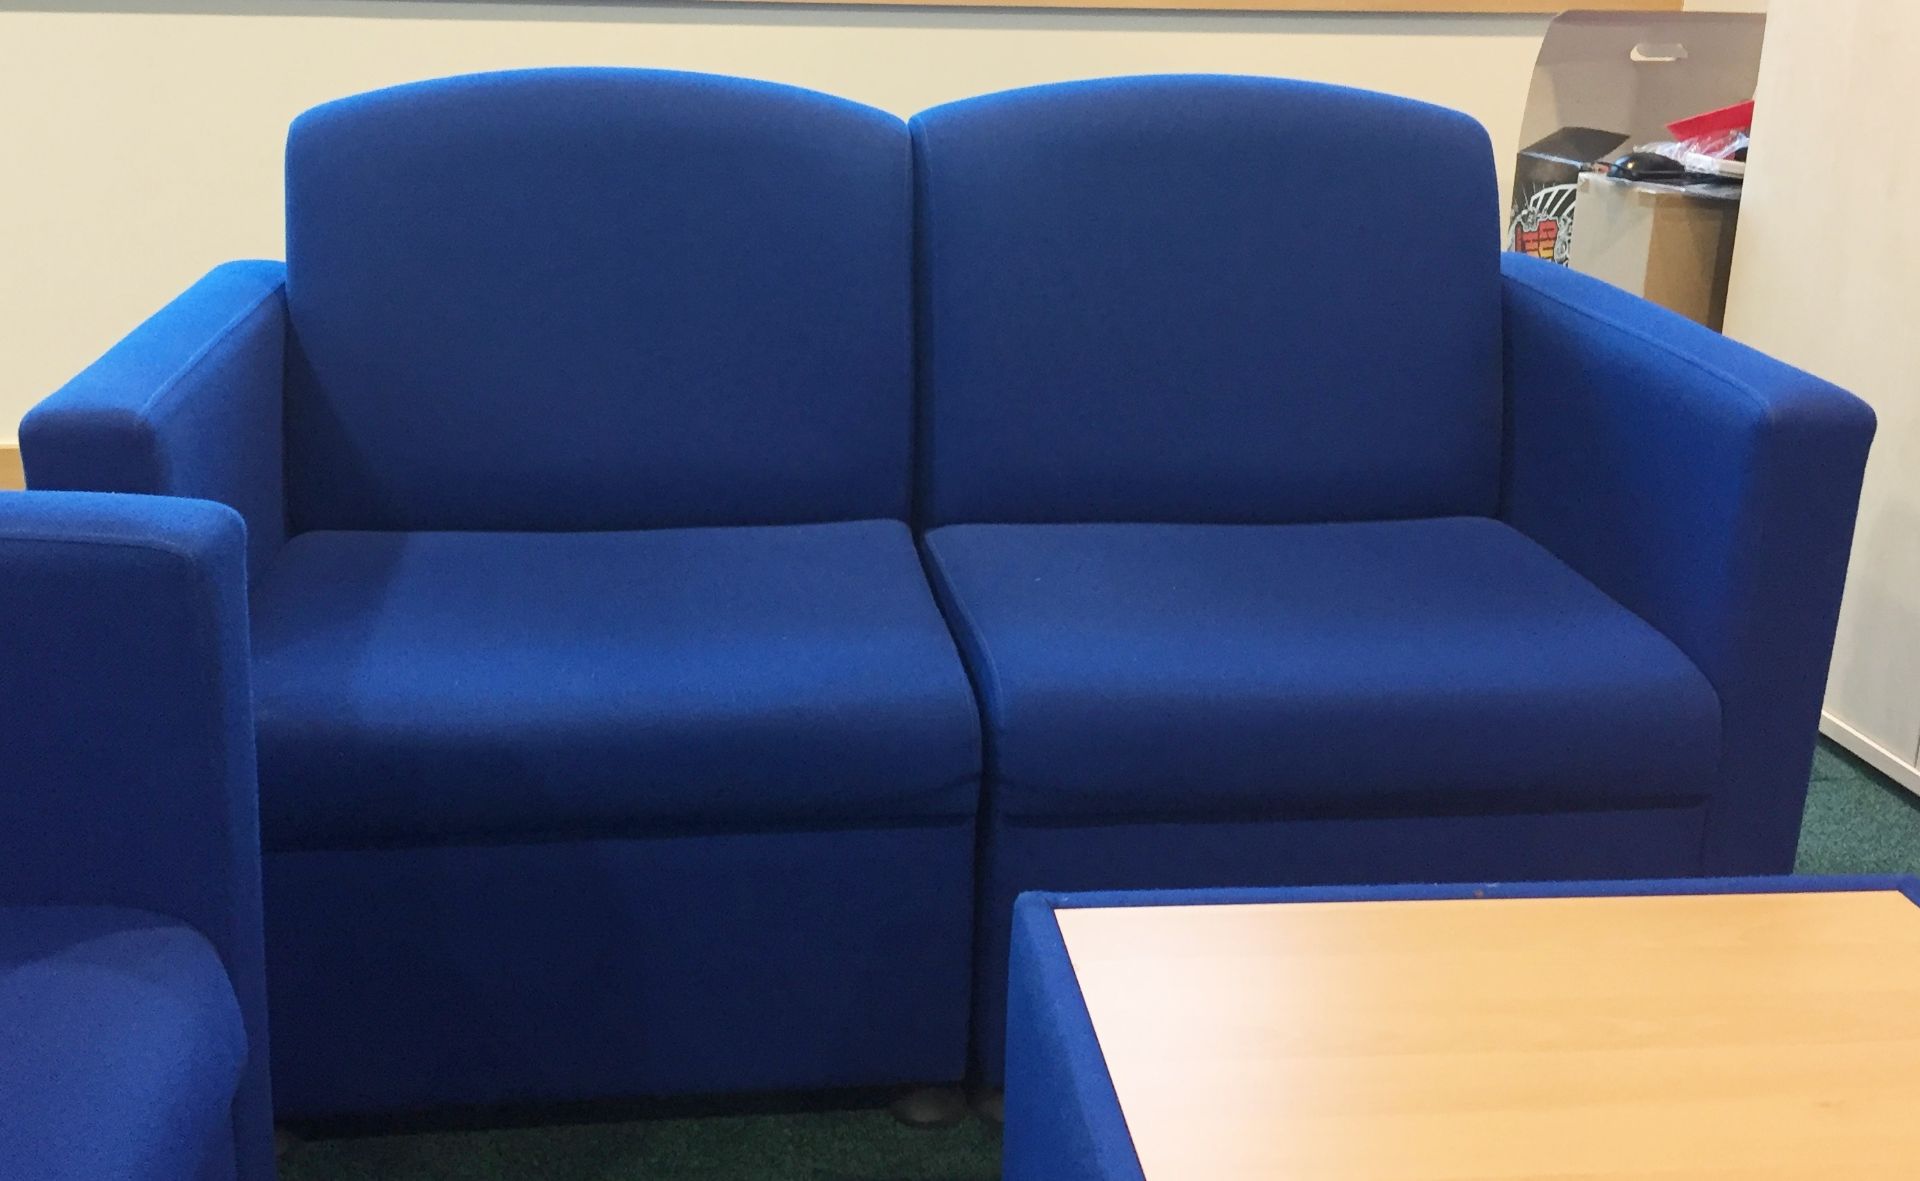 1 x Blue Fabric Waiting Room Sofa – Comes in Two Pieces For Easy Transportation - Hard Wearing - Image 3 of 6